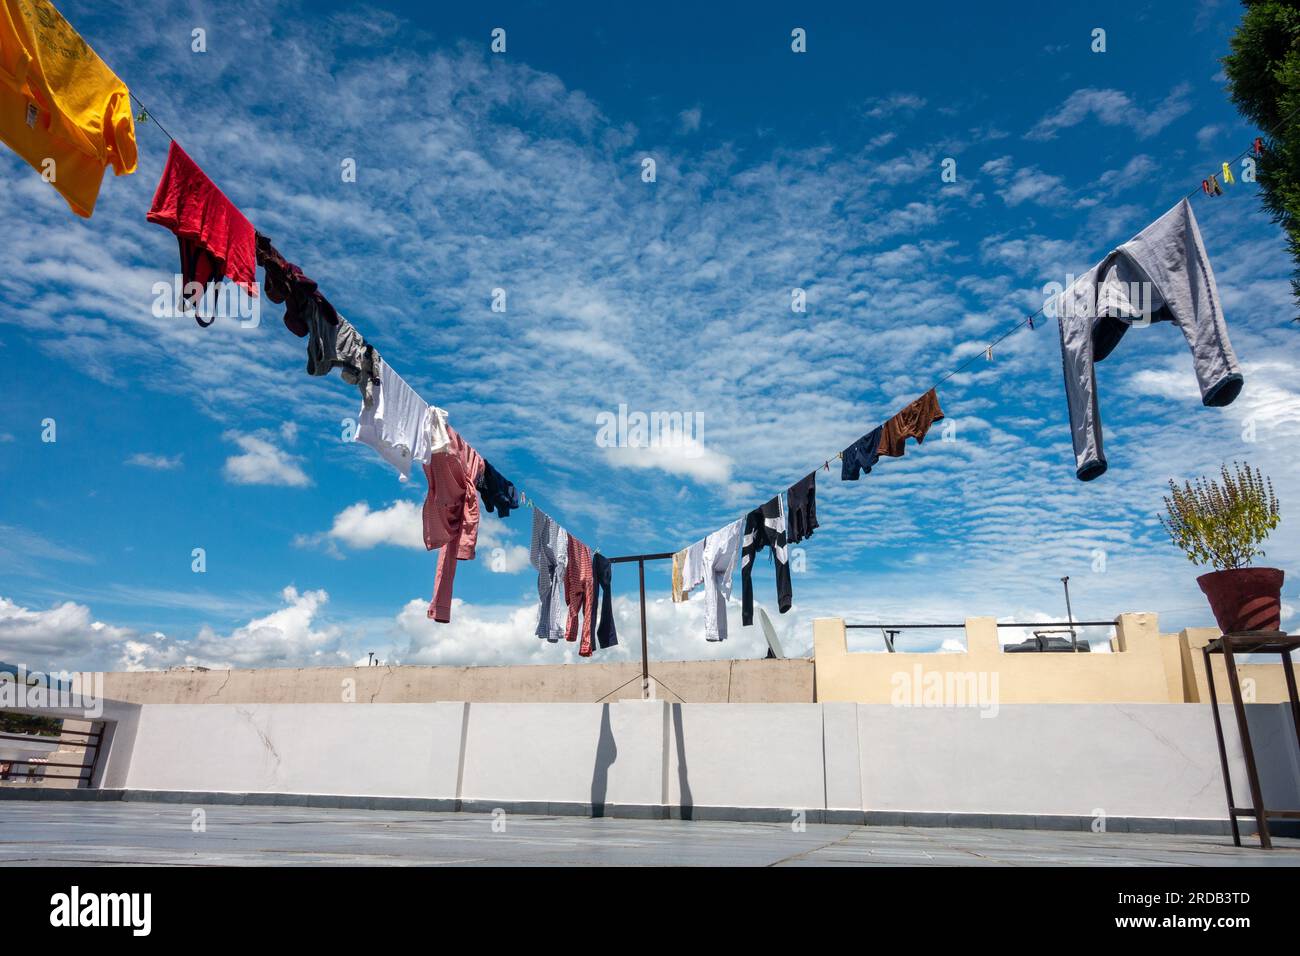 Washed clothes hanging on lines on a sunny day with beautiful blue skies and white clouds in the background. India. Stock Photo